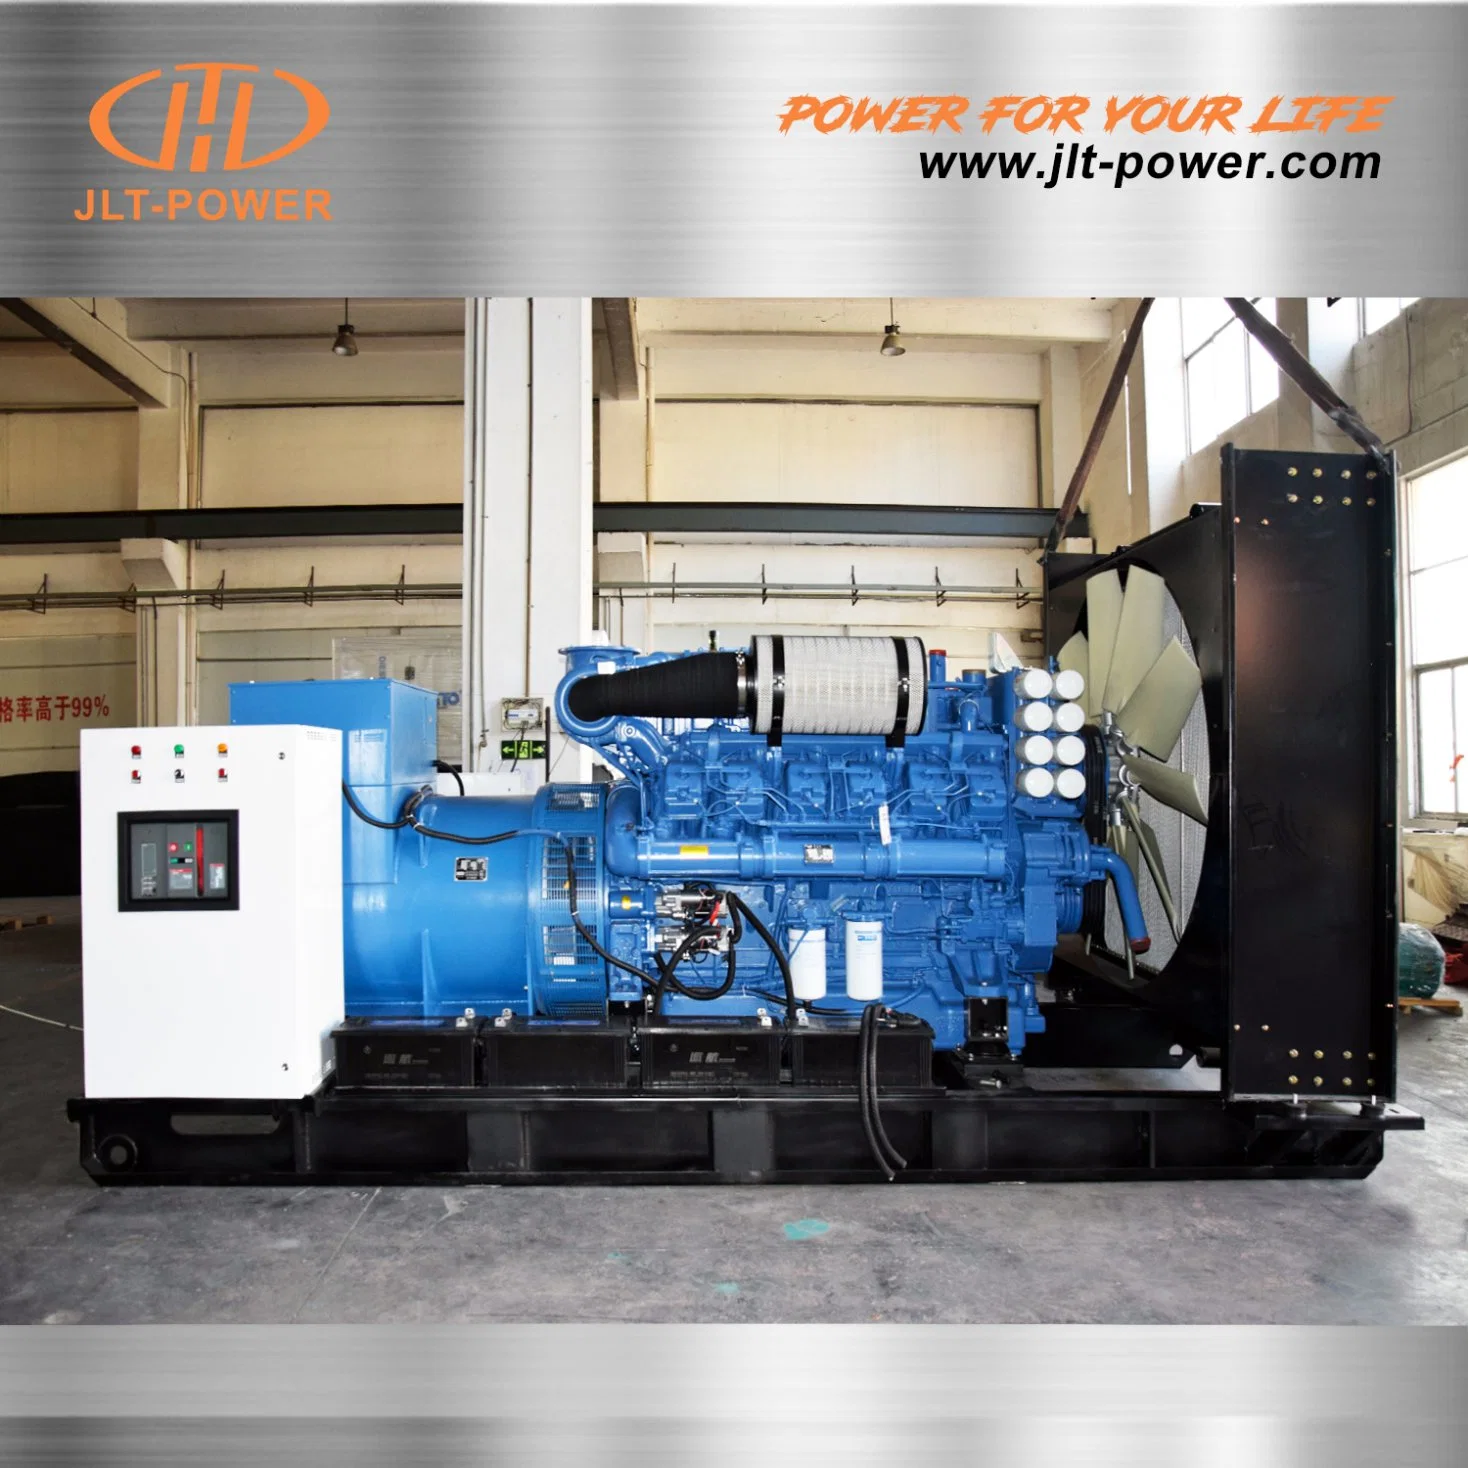 620kw 775kVA Diesel Generator Set for The Project Is Powered by Three-Phase Double Bearing AVR Brushless Alternator